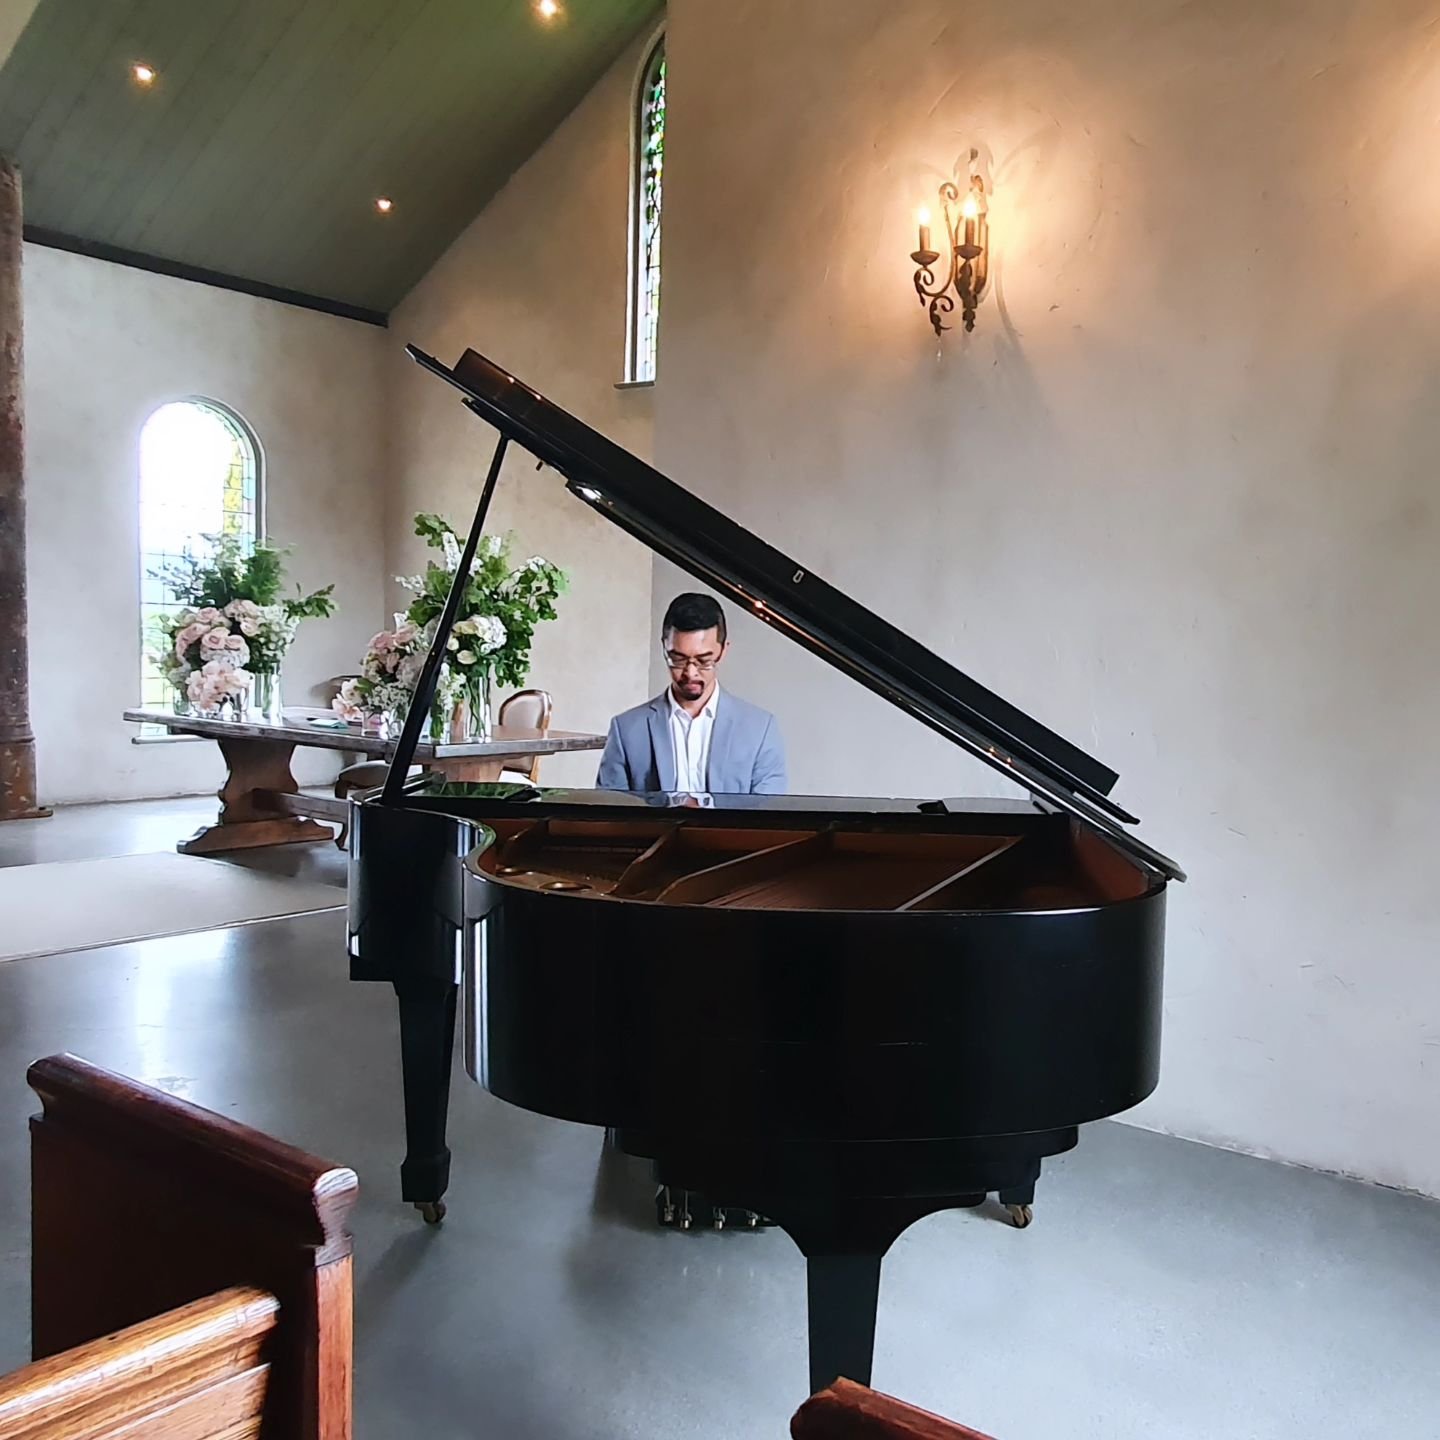 Looking forward to playing the grand piano at the Stones of the Yarra Valley again in just a few short months.

Looking for a pianist who can create your own medley of songs for your wedding? DM me today.

@stonesoftheyarravalley

#piano #pianist #pi